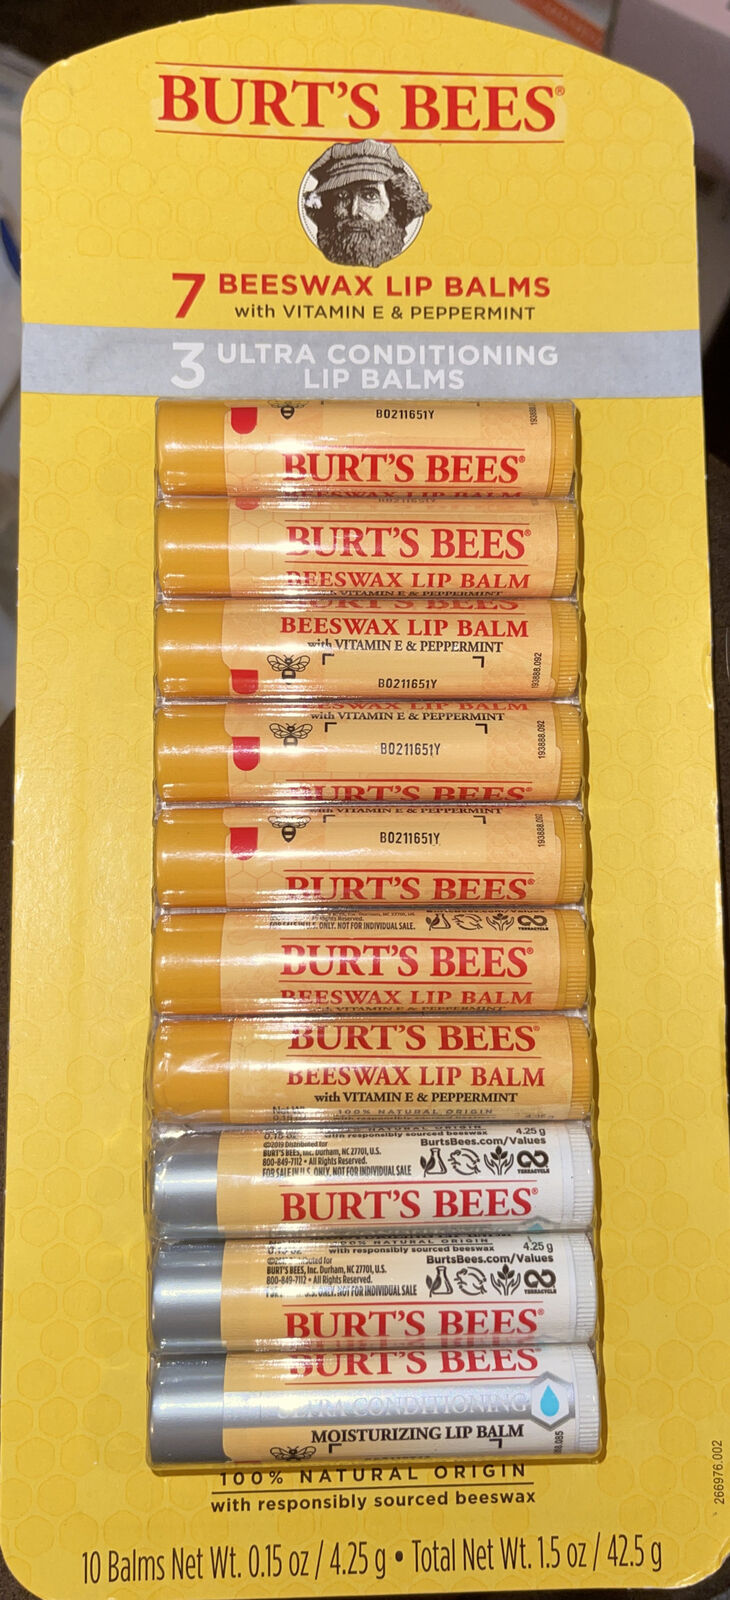 Burts Bees Lip Balm 7 Beeswax + Ultra Natur supreme 100% Oakland Mall Conditioning 3